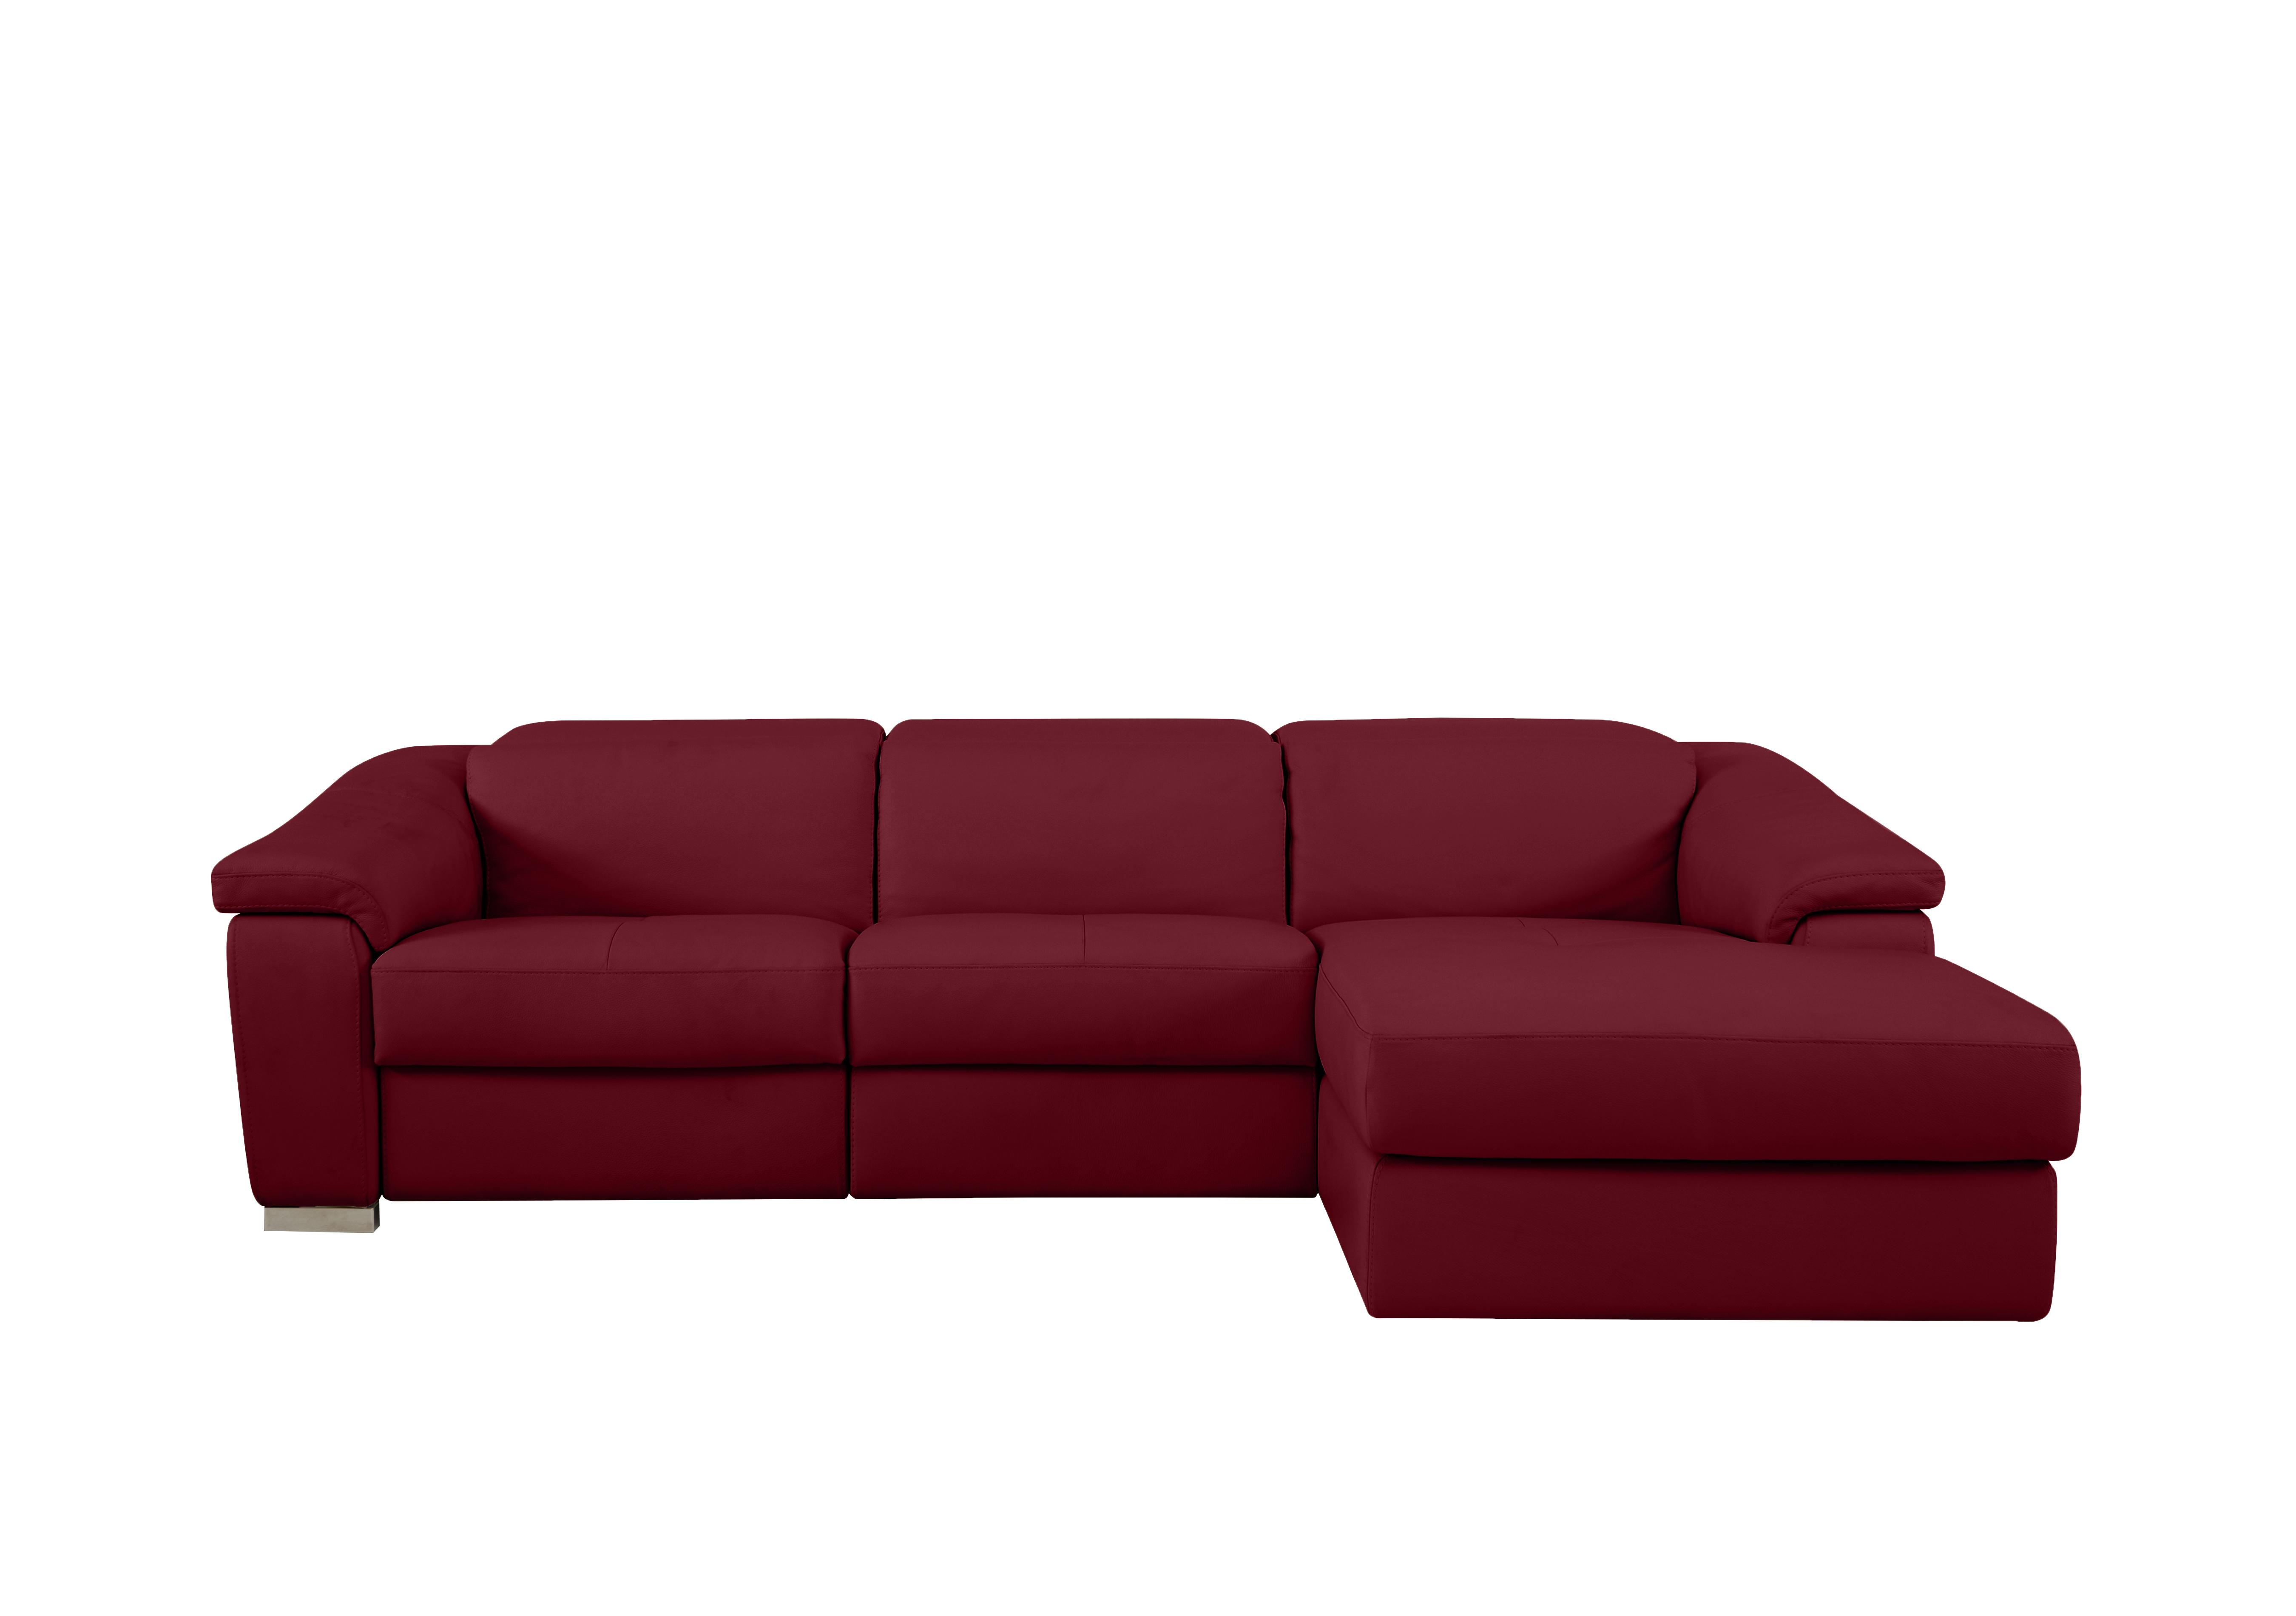 Galileo Leather Chaise End Sofa in Dali Bordeaux 1521 Ch on Furniture Village